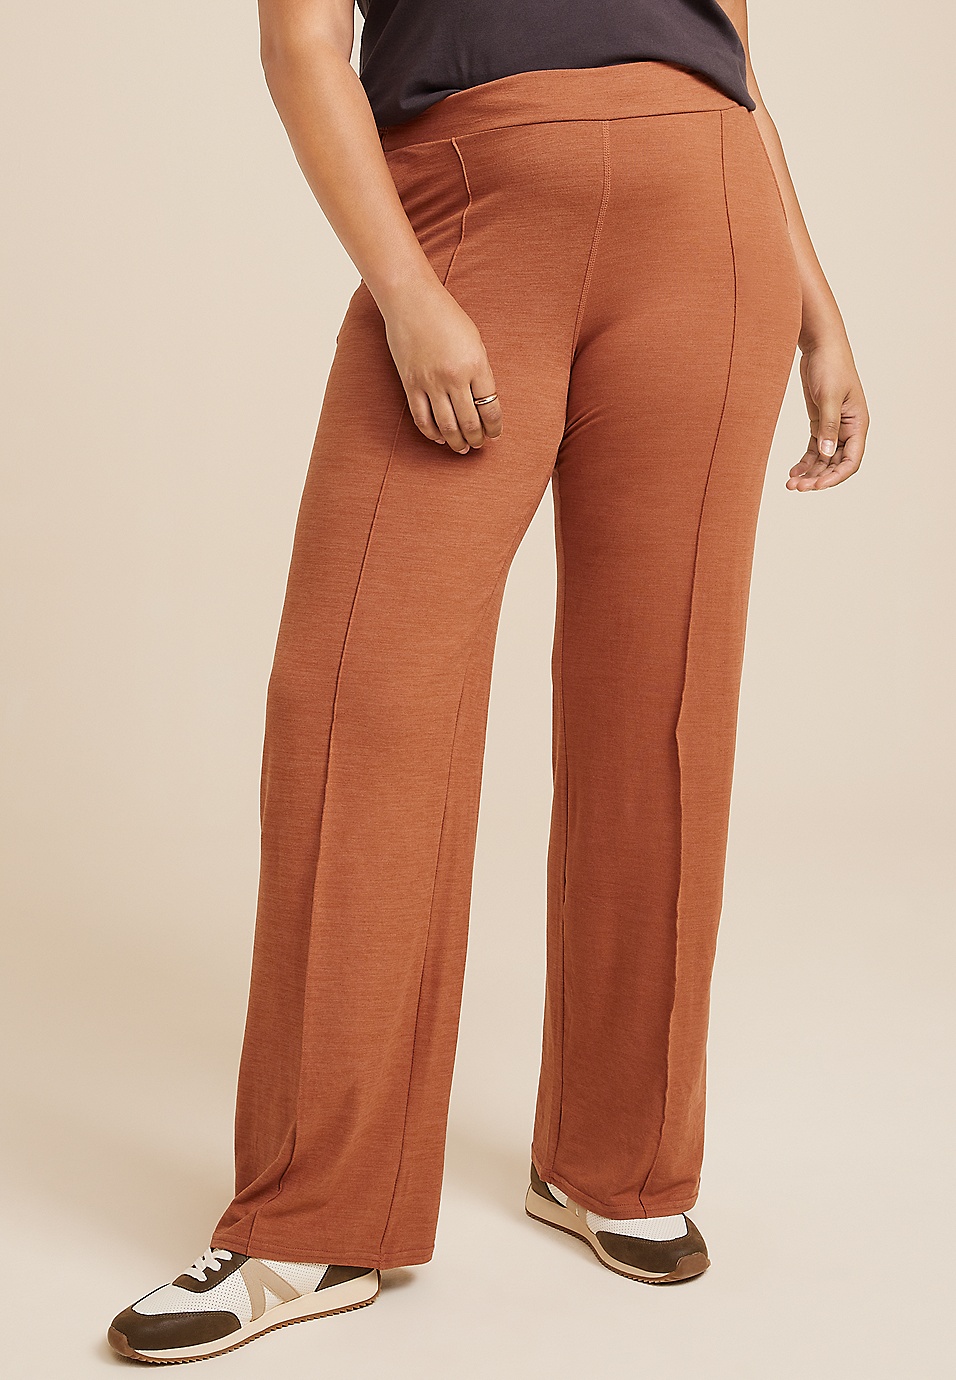 Stretch High-Rise Full Length Pant, Women's Trousers